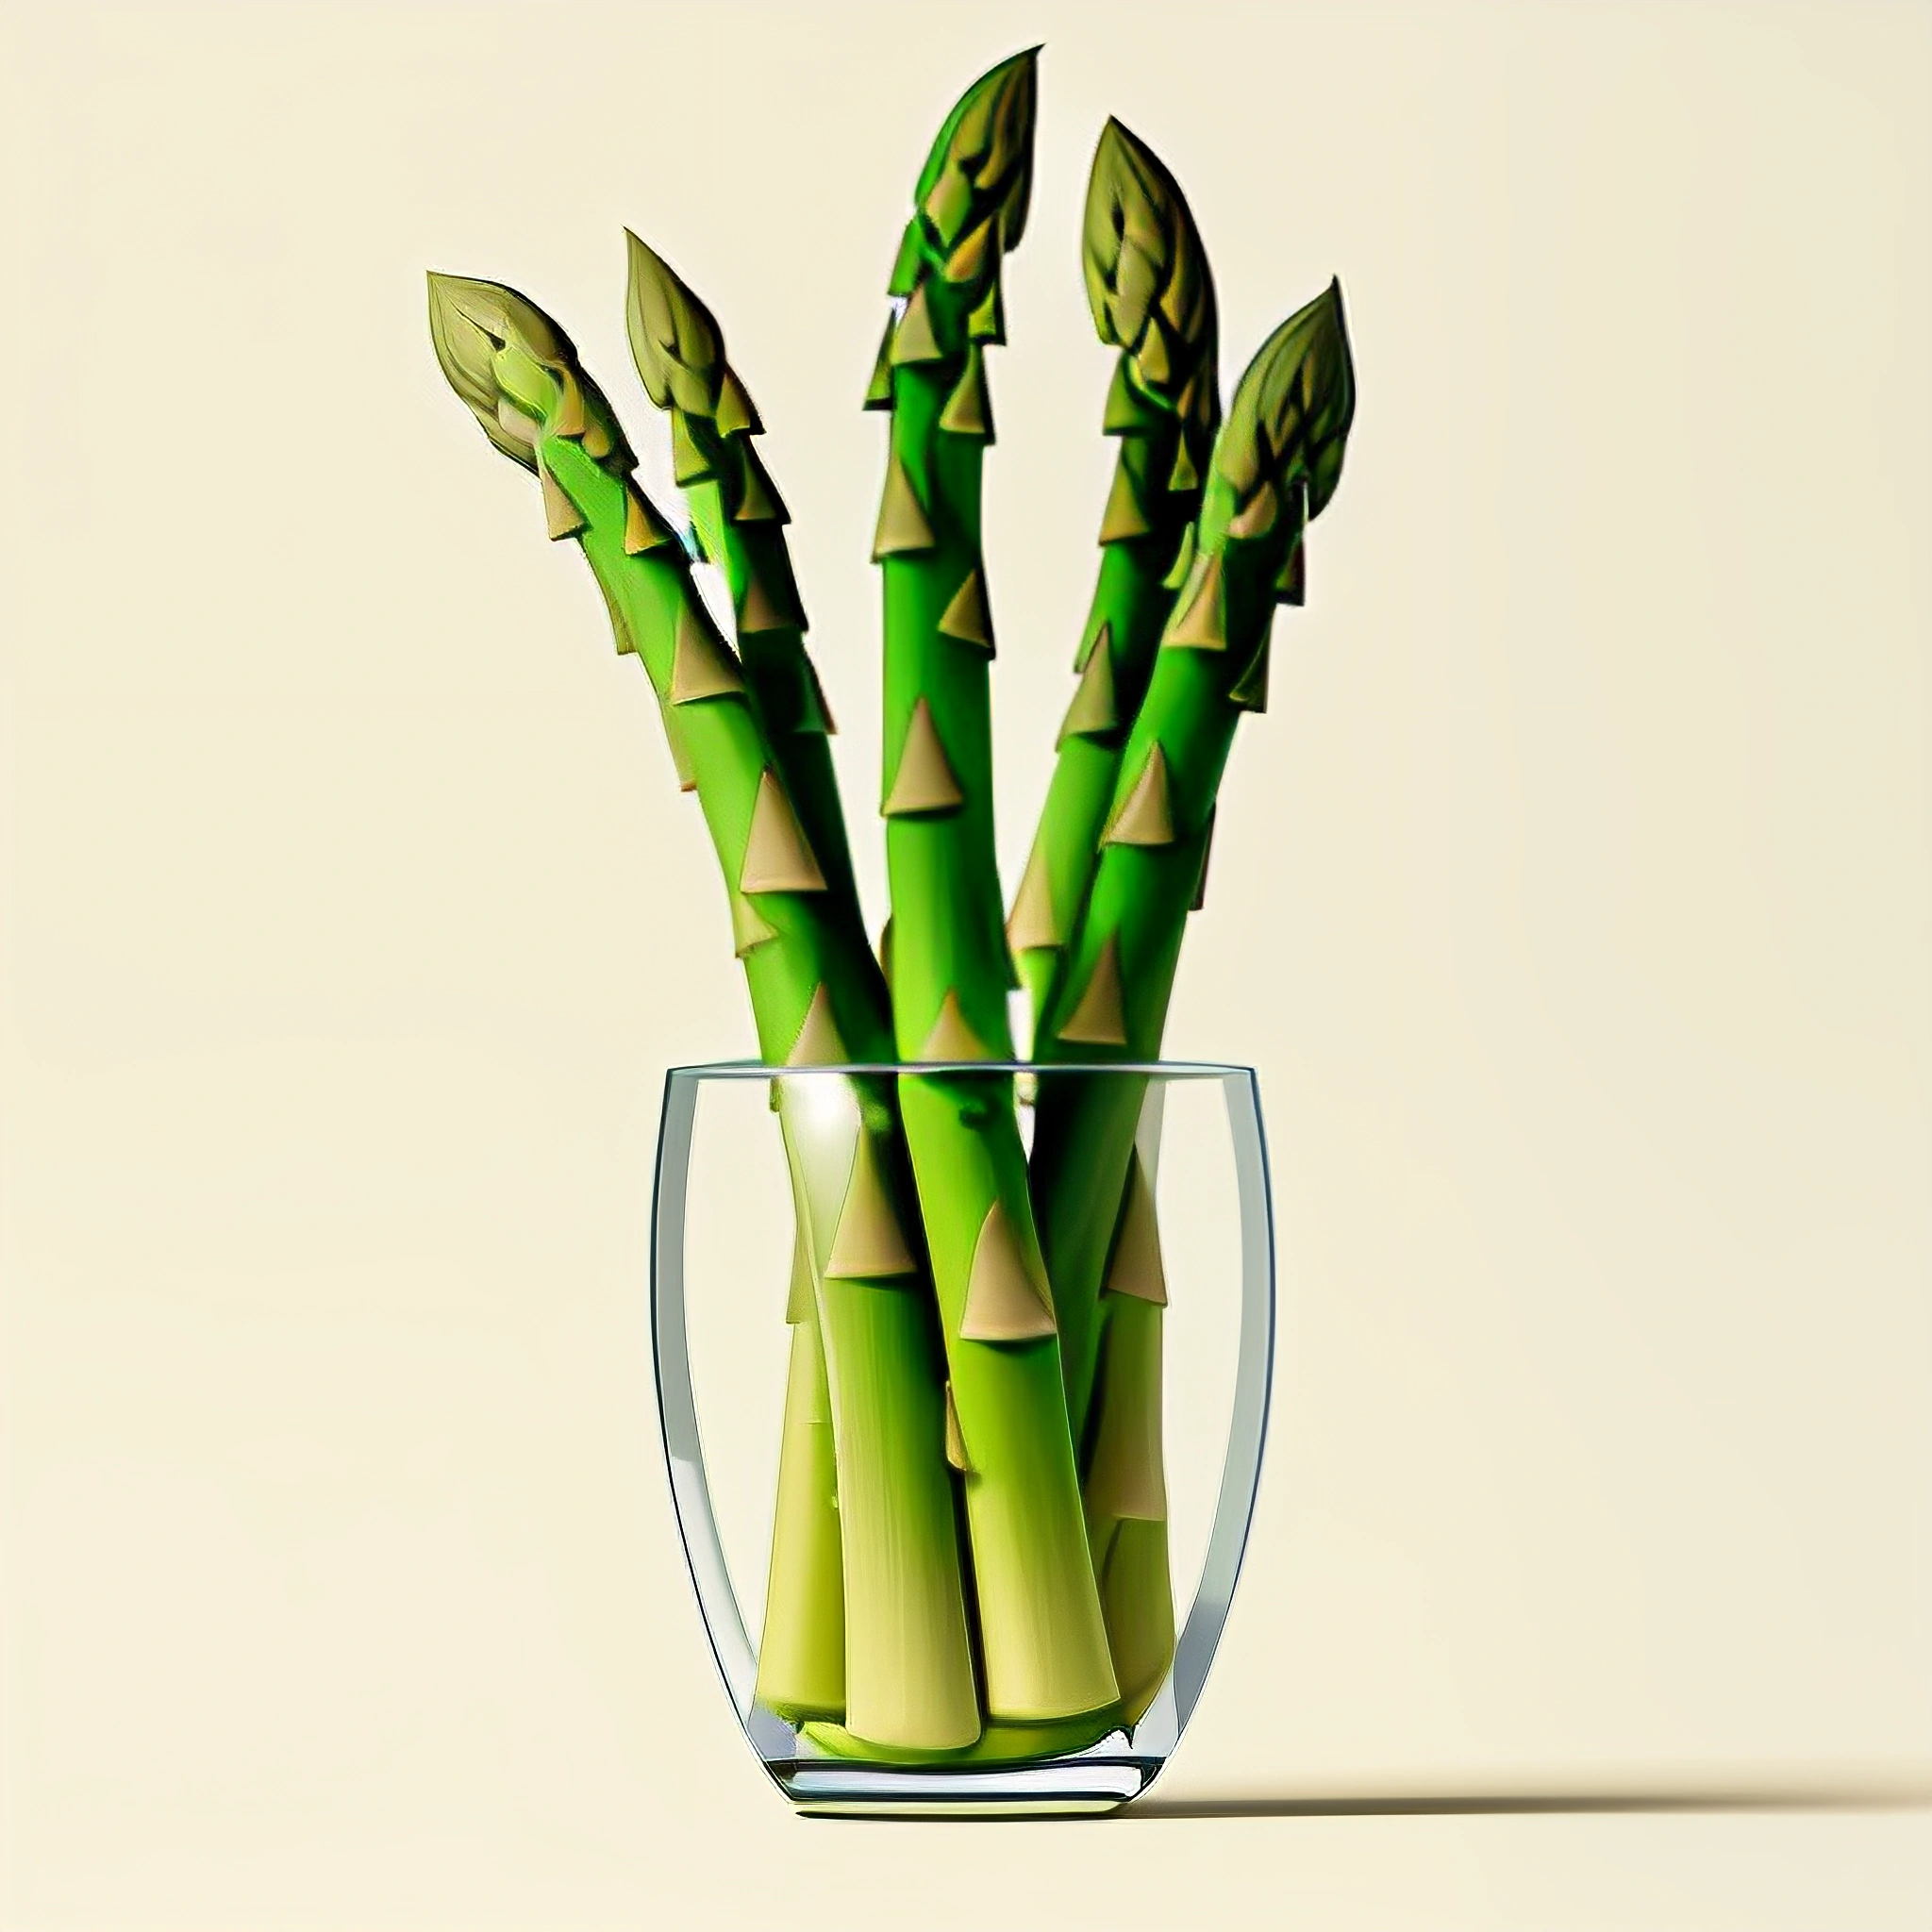 there are asparagus in a glass vase on a table